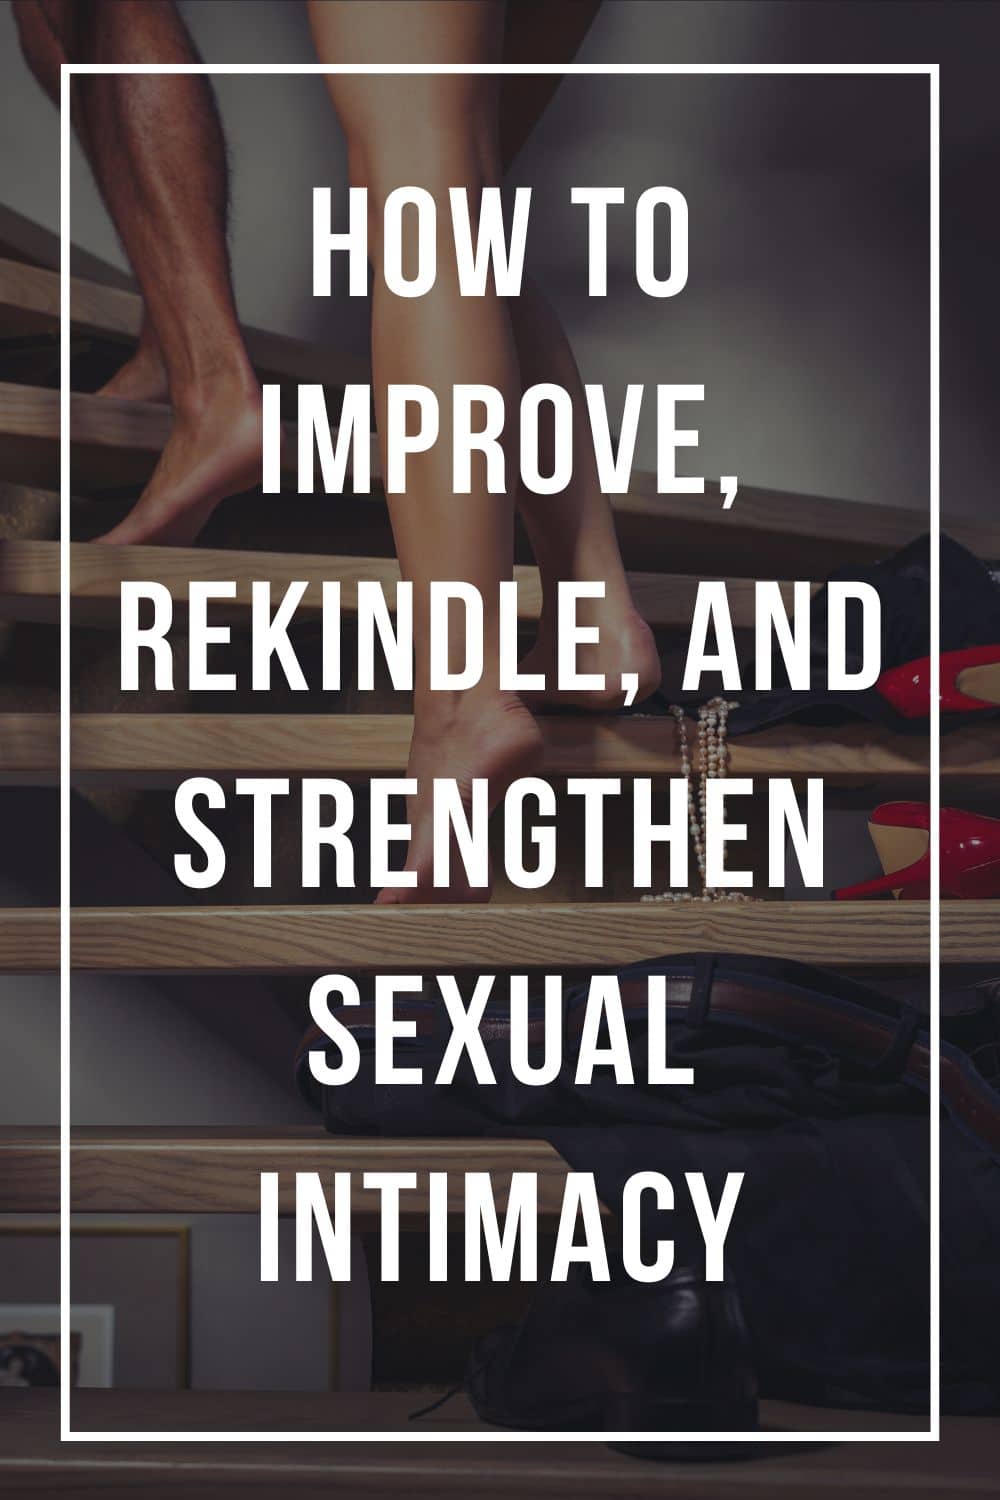 Sexual Intimacy in Marriage: How to Improve, Strengthen, and Become More Intimate With Your Spouse